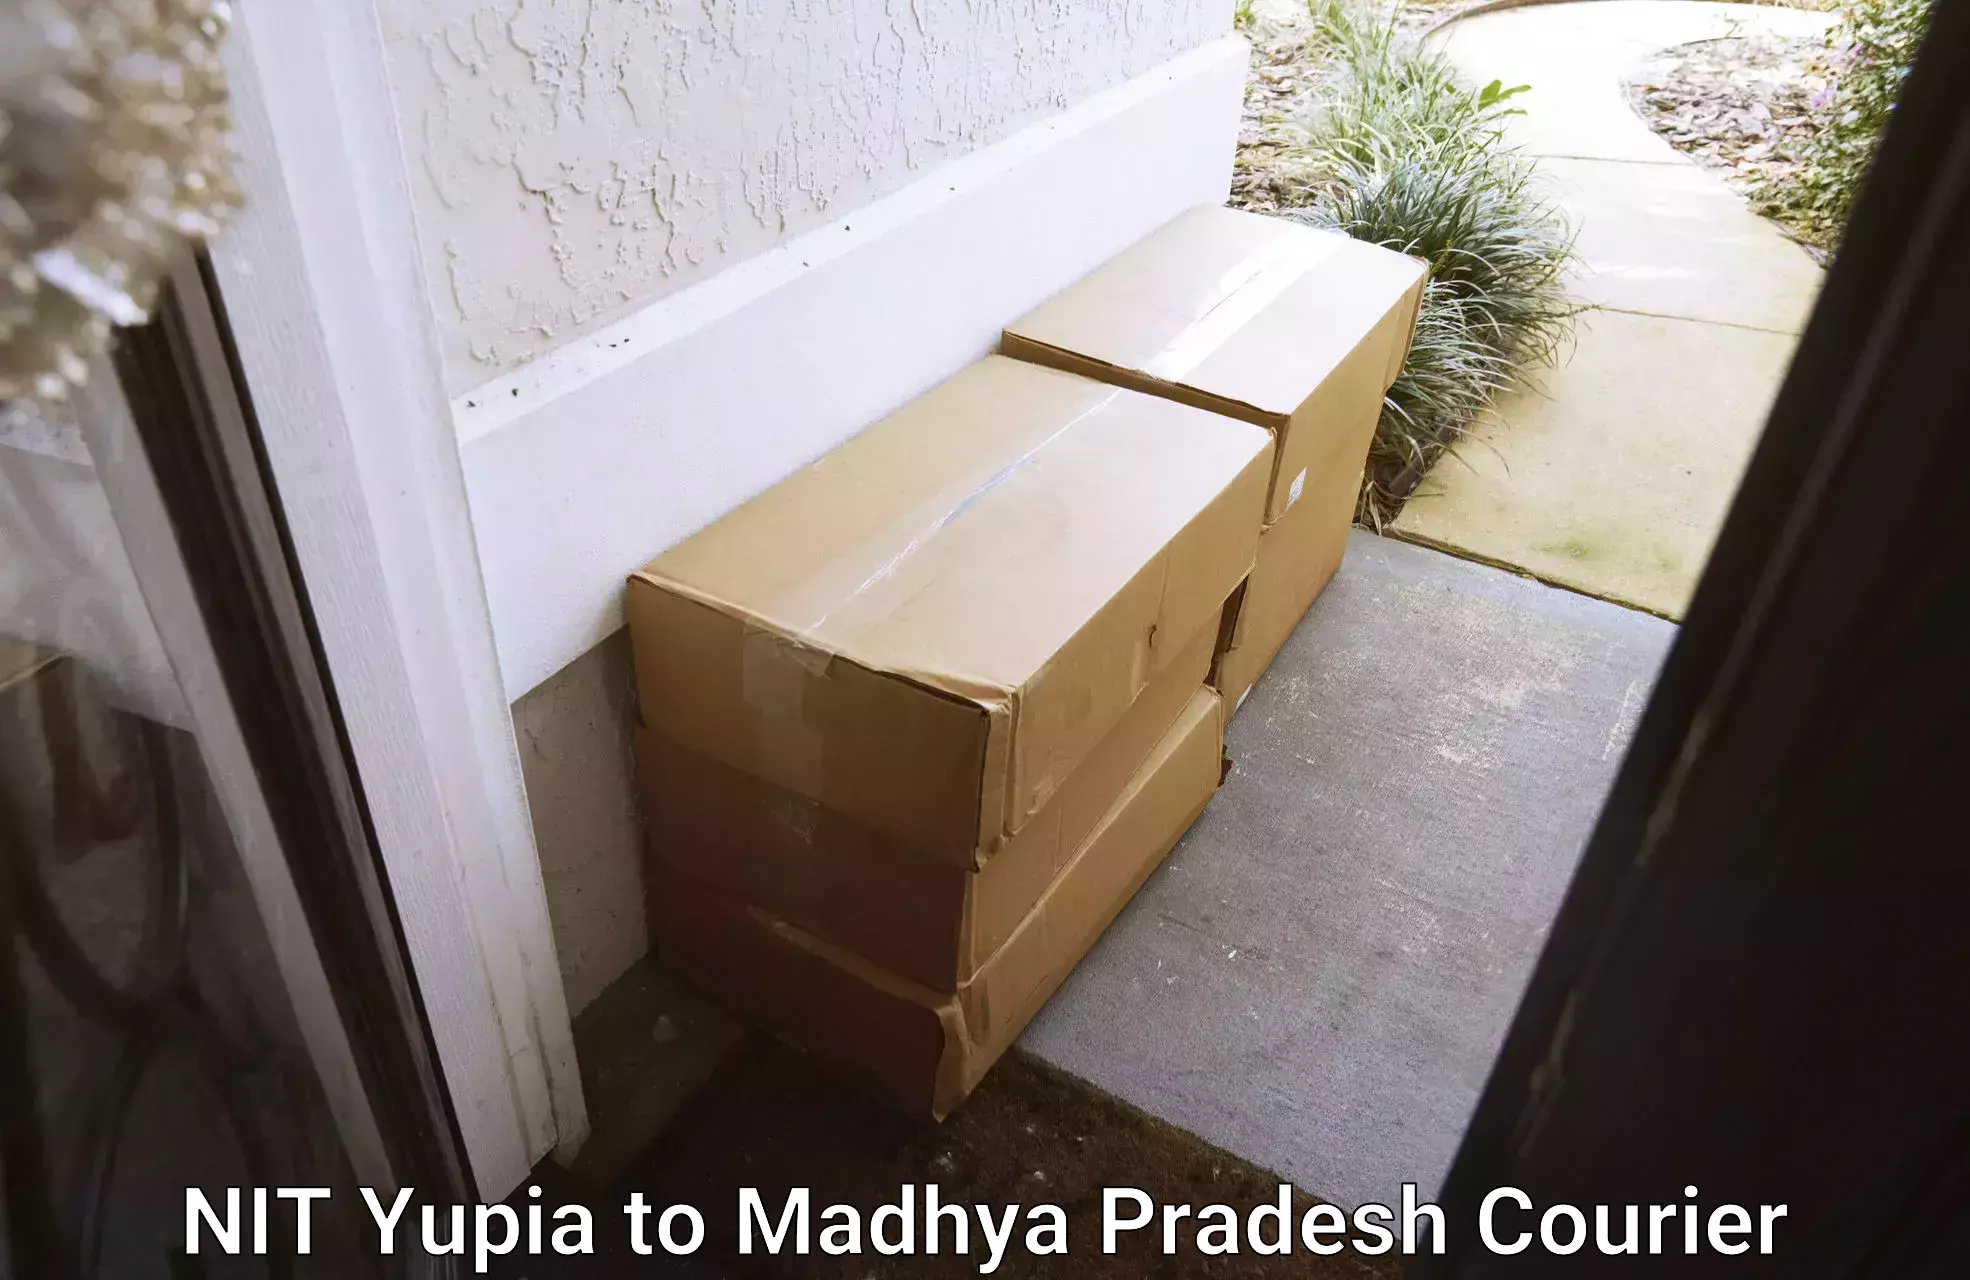 Courier app NIT Yupia to Burhanpur